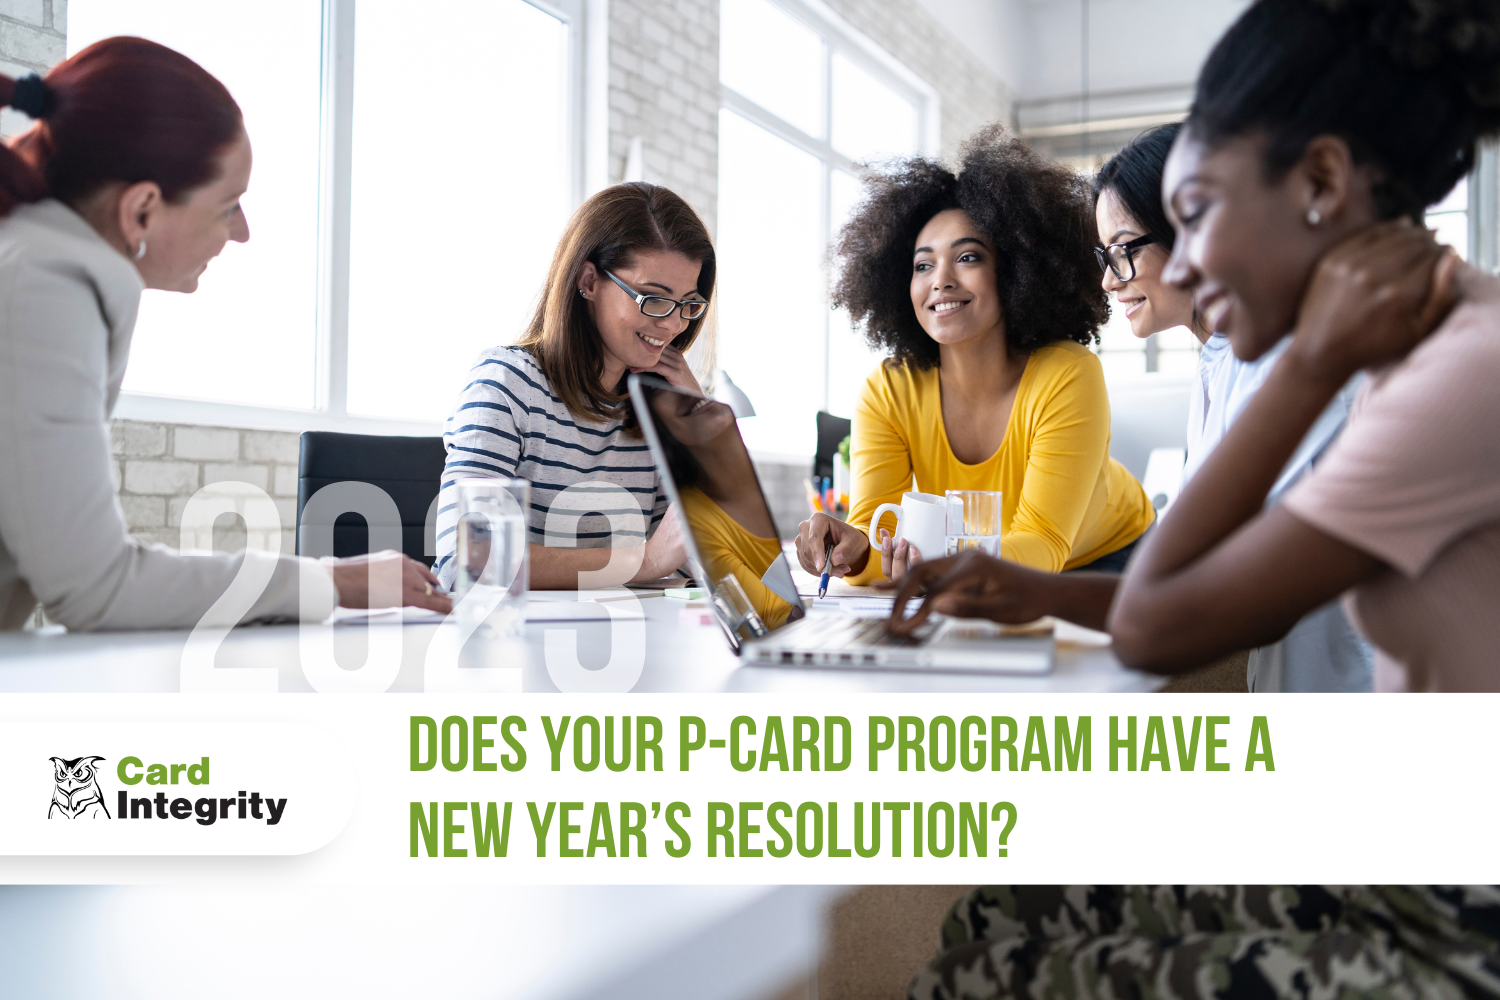 Does Your P-Card Program Have a New Year’s Resolution?